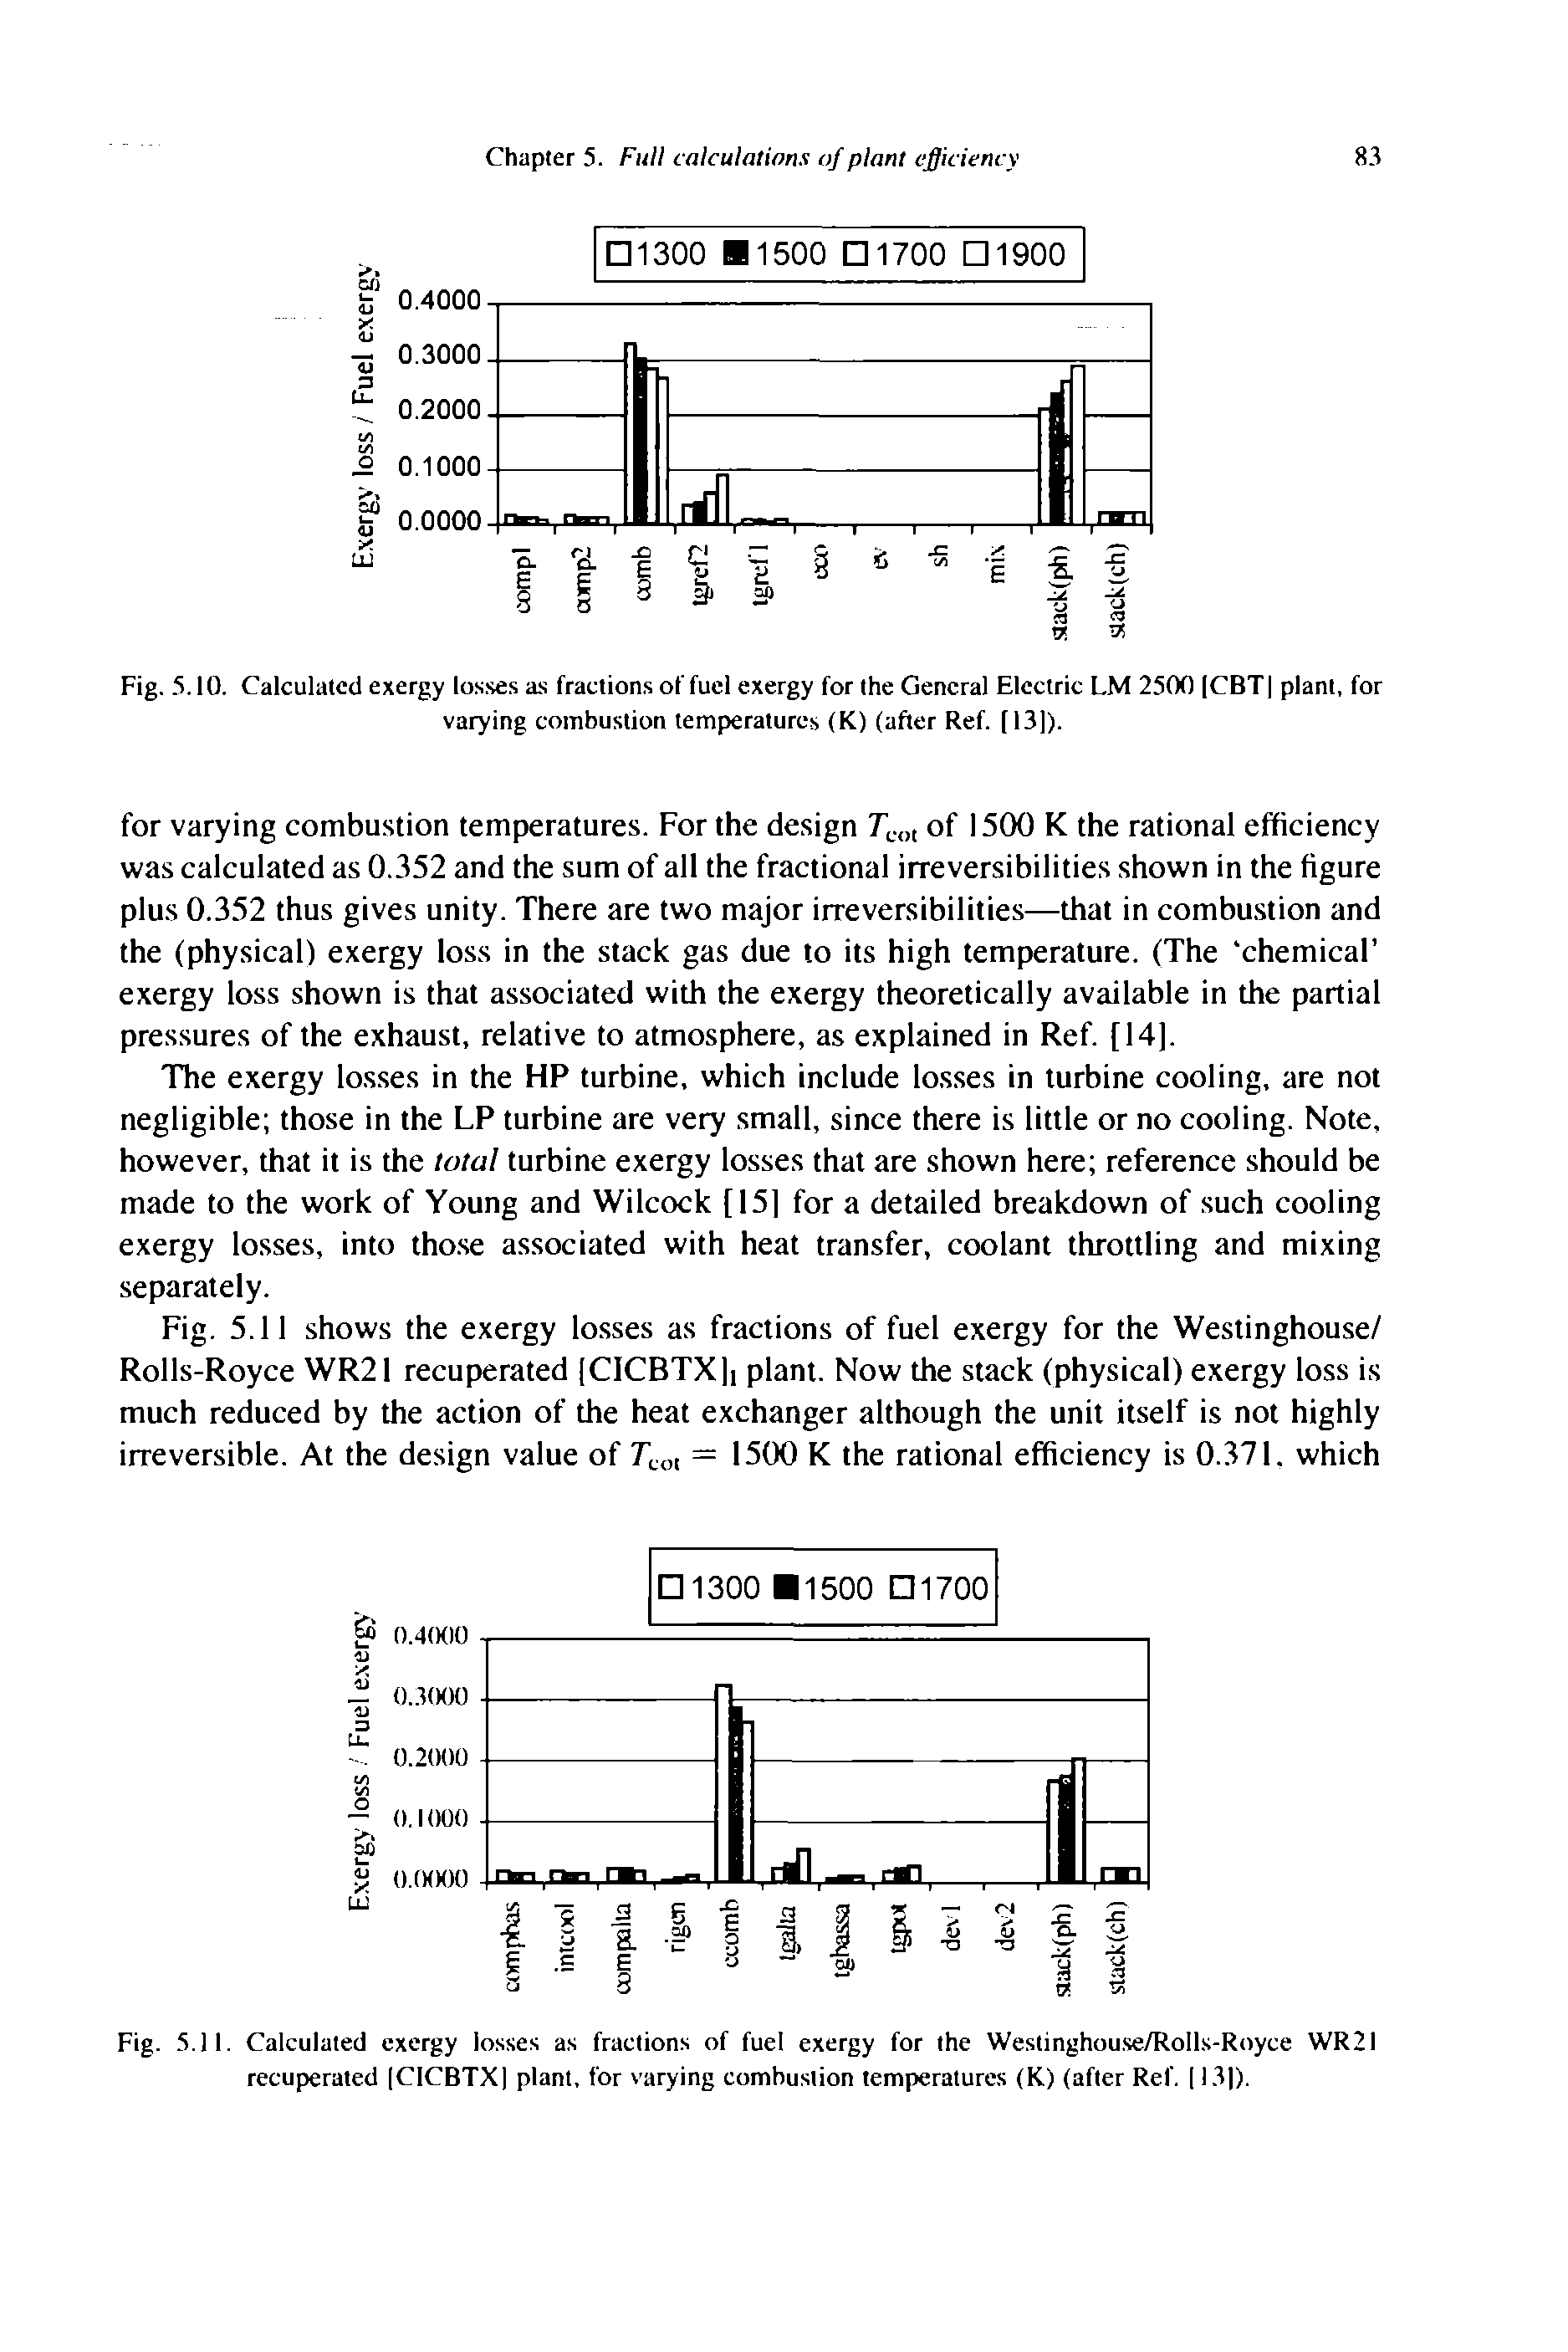 Fig. 5.10. Calculated exergy losses as fractions of fuel exergy for the General Electric LM 2500 CBT plant, for varying combustion temperatures (K) (after Ref. [13 ).